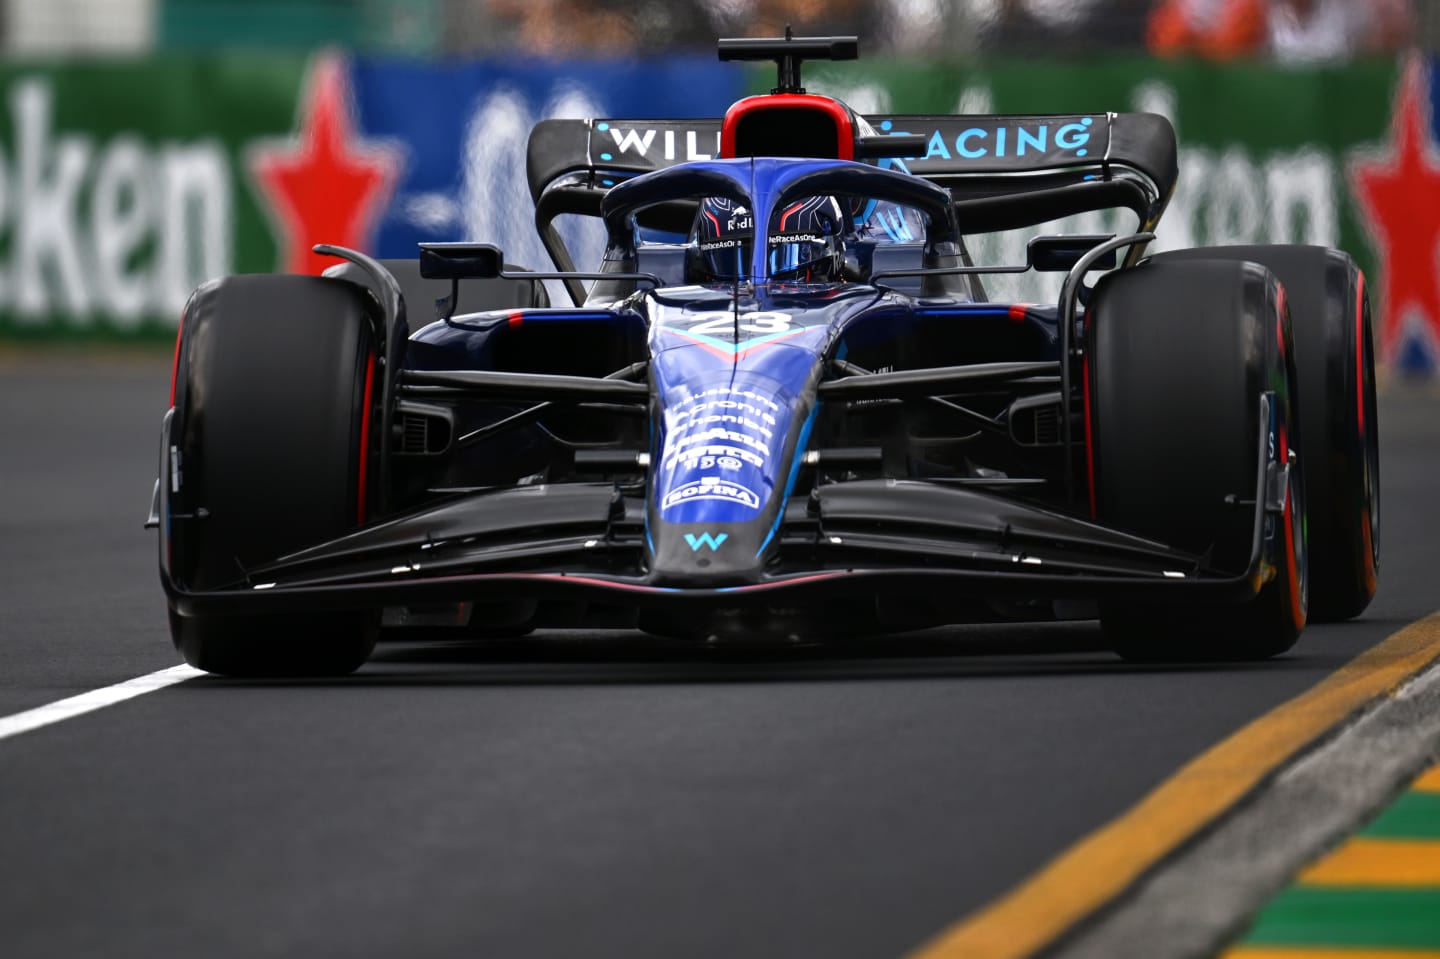 MELBOURNE, AUSTRALIA - APRIL 09: Alexander Albon of Thailand driving the (23) Williams FW44 Mercedes on track during final practice ahead of the F1 Grand Prix of Australia at Melbourne Grand Prix Circuit on April 09, 2022 in Melbourne, Australia. (Photo by Clive Mason/Getty Images)